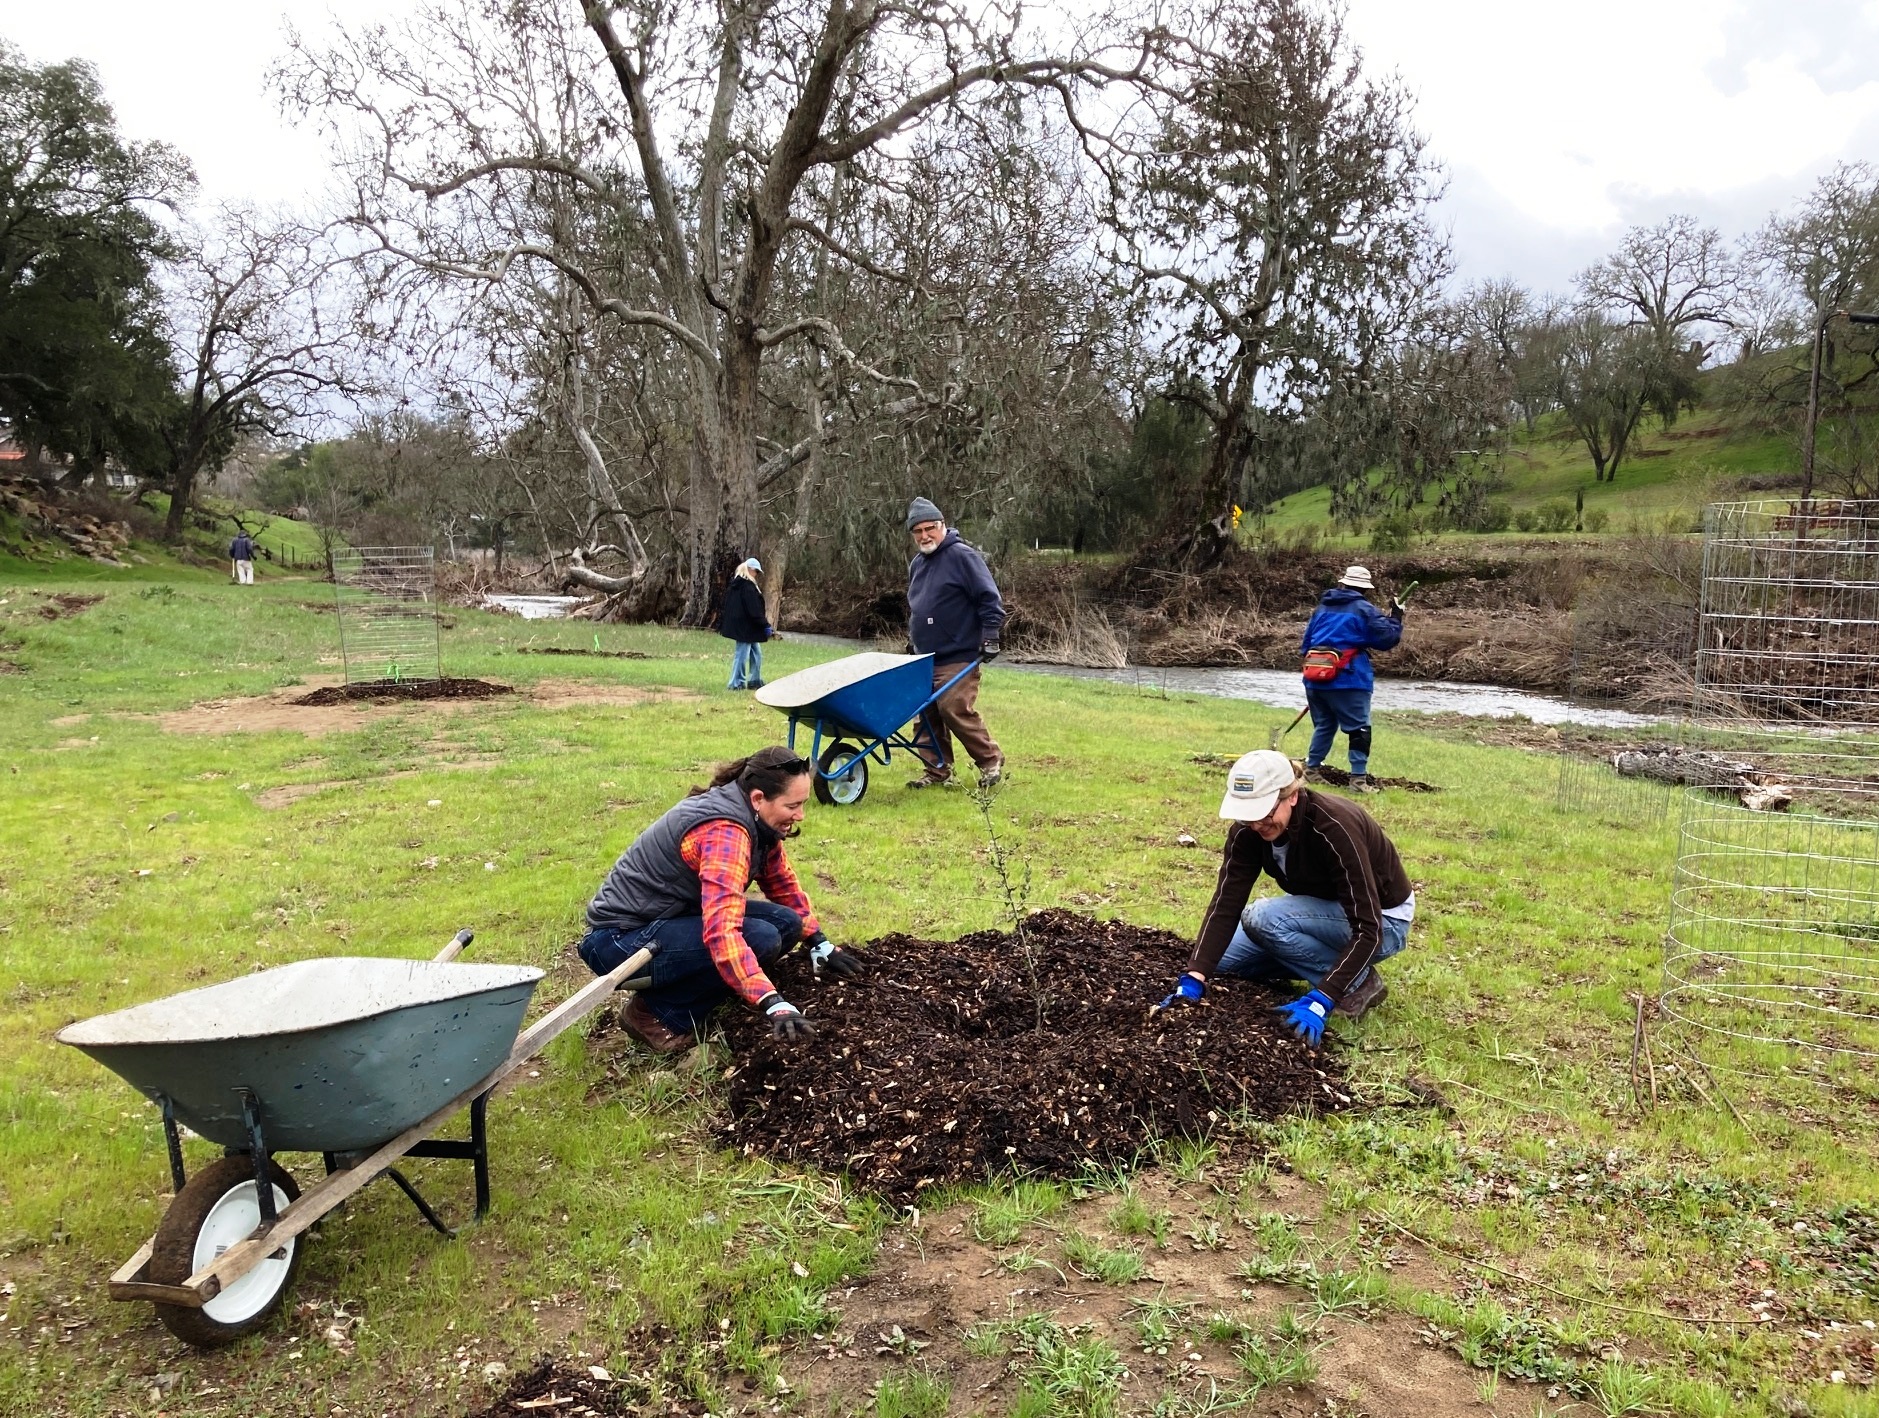 Zarah and Meg and other volunteers weeding and mulching the oak seedlings.